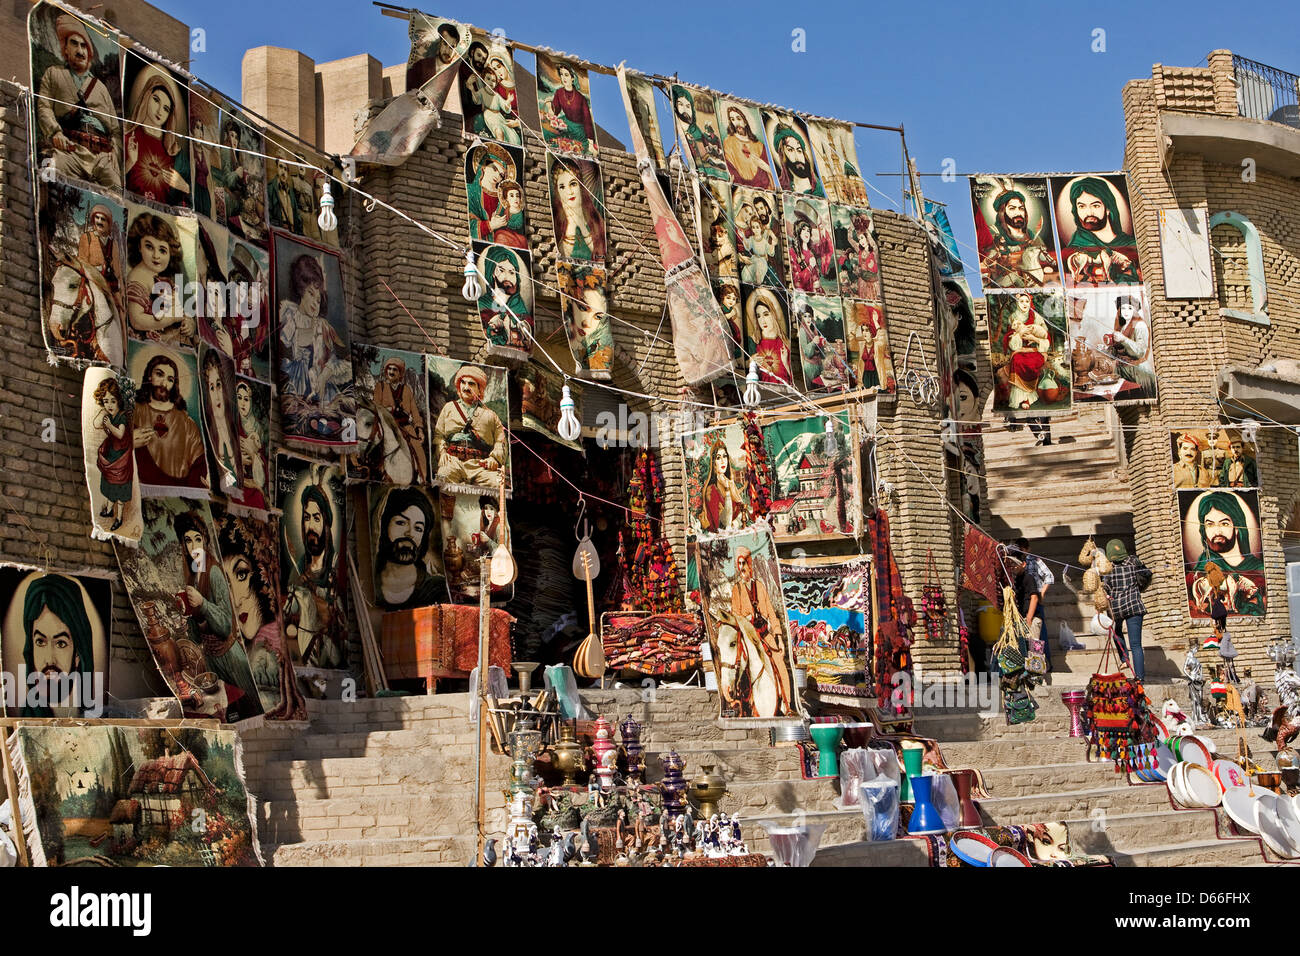 A traditional rug shop on the outskirts of the Hewler Wall which surrounds the ancient city in Erbil, Iraq. Stock Photo